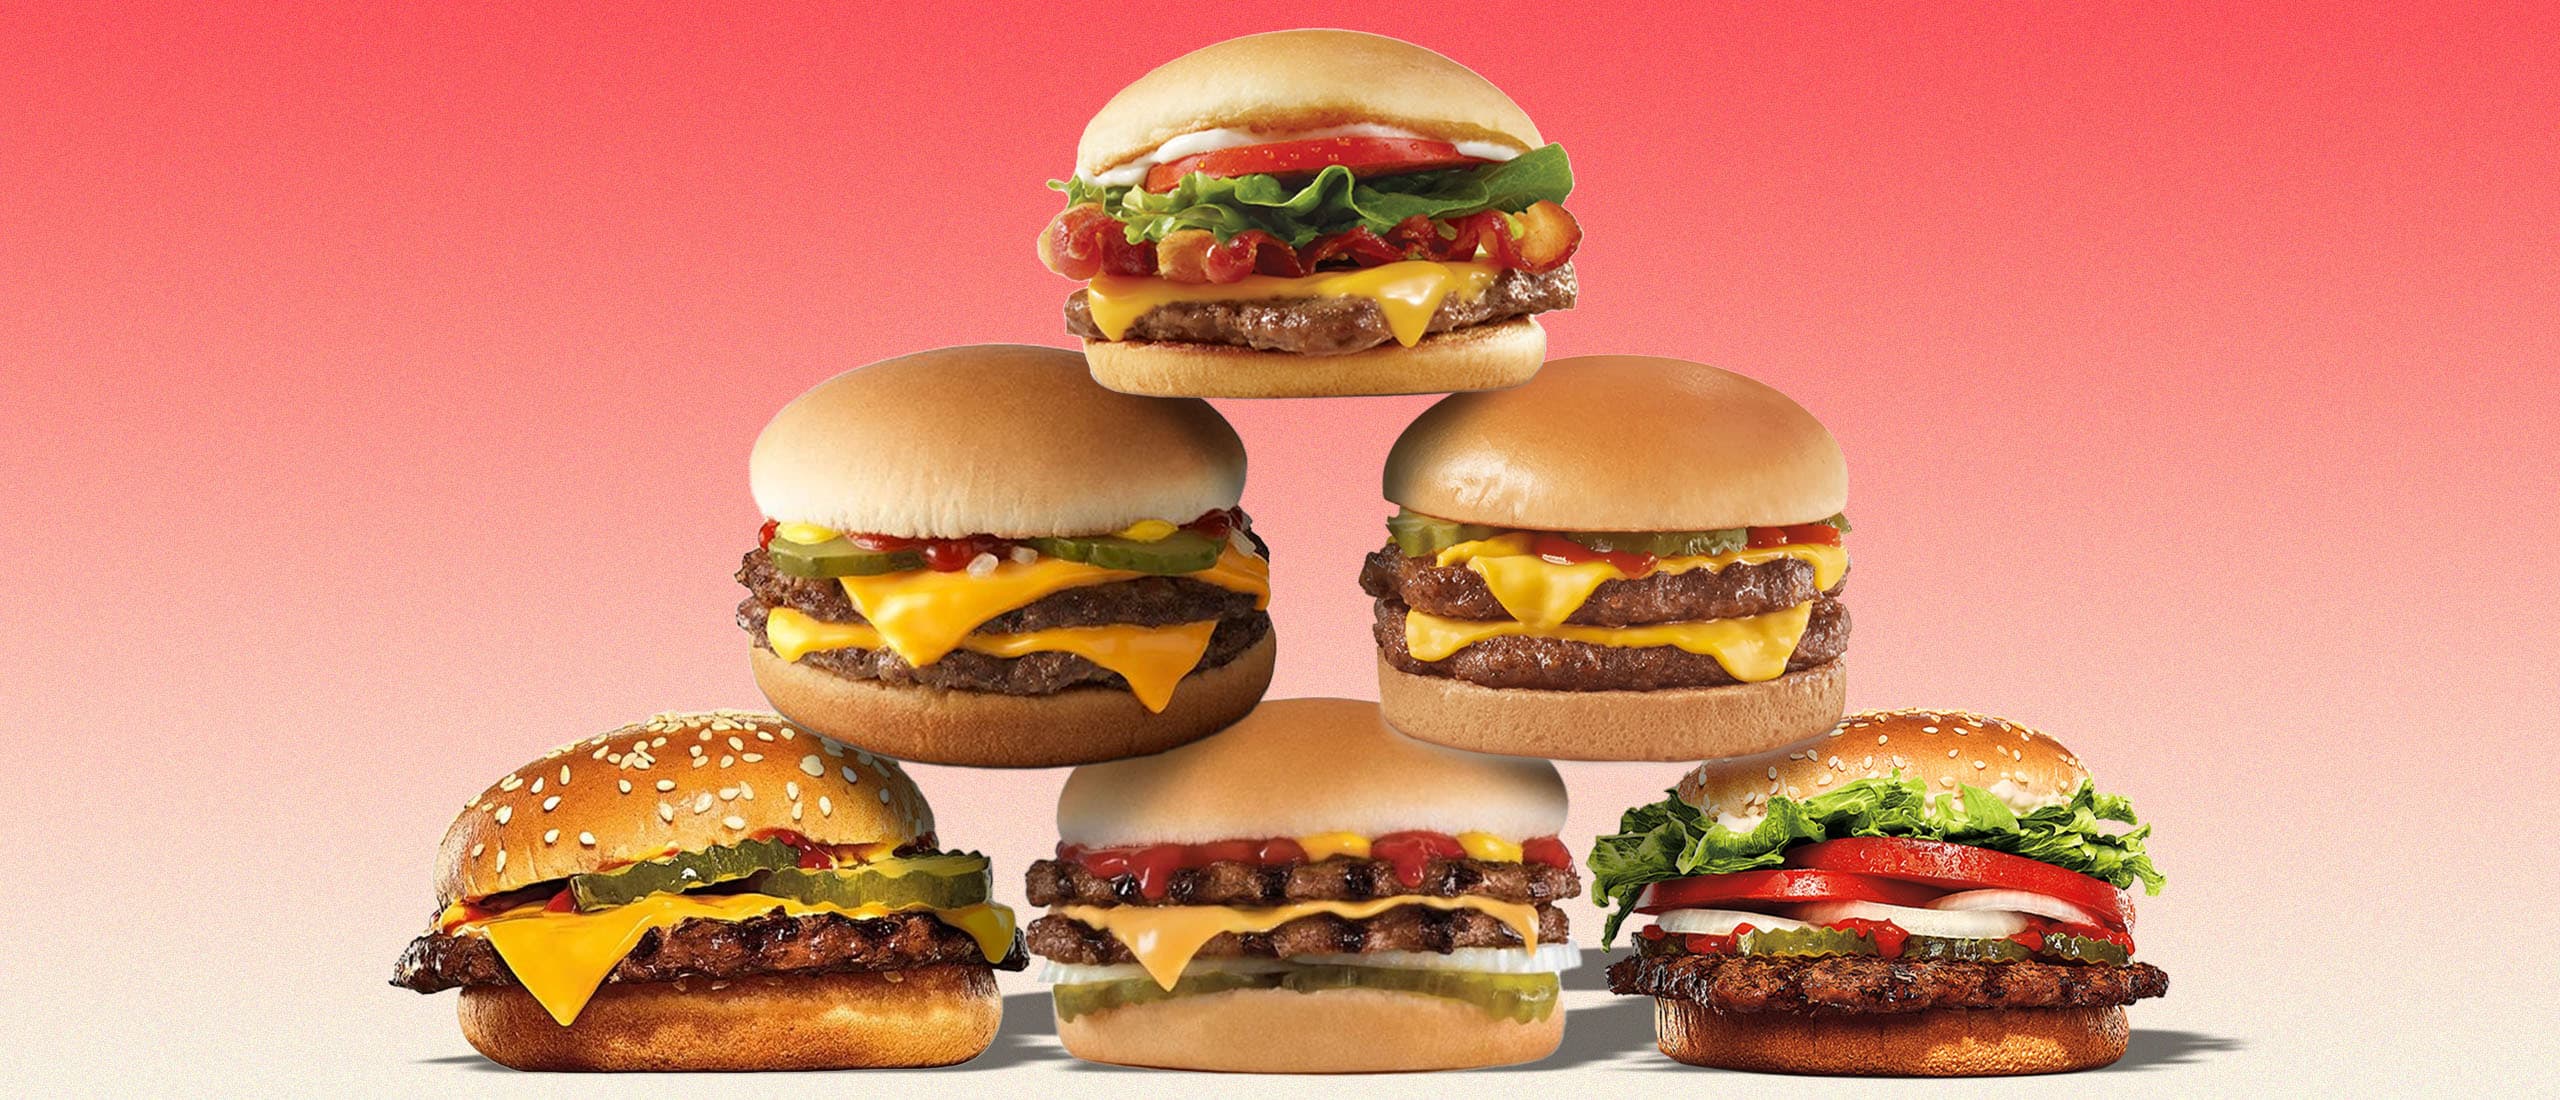 Cheeseburgers stacked sky high.